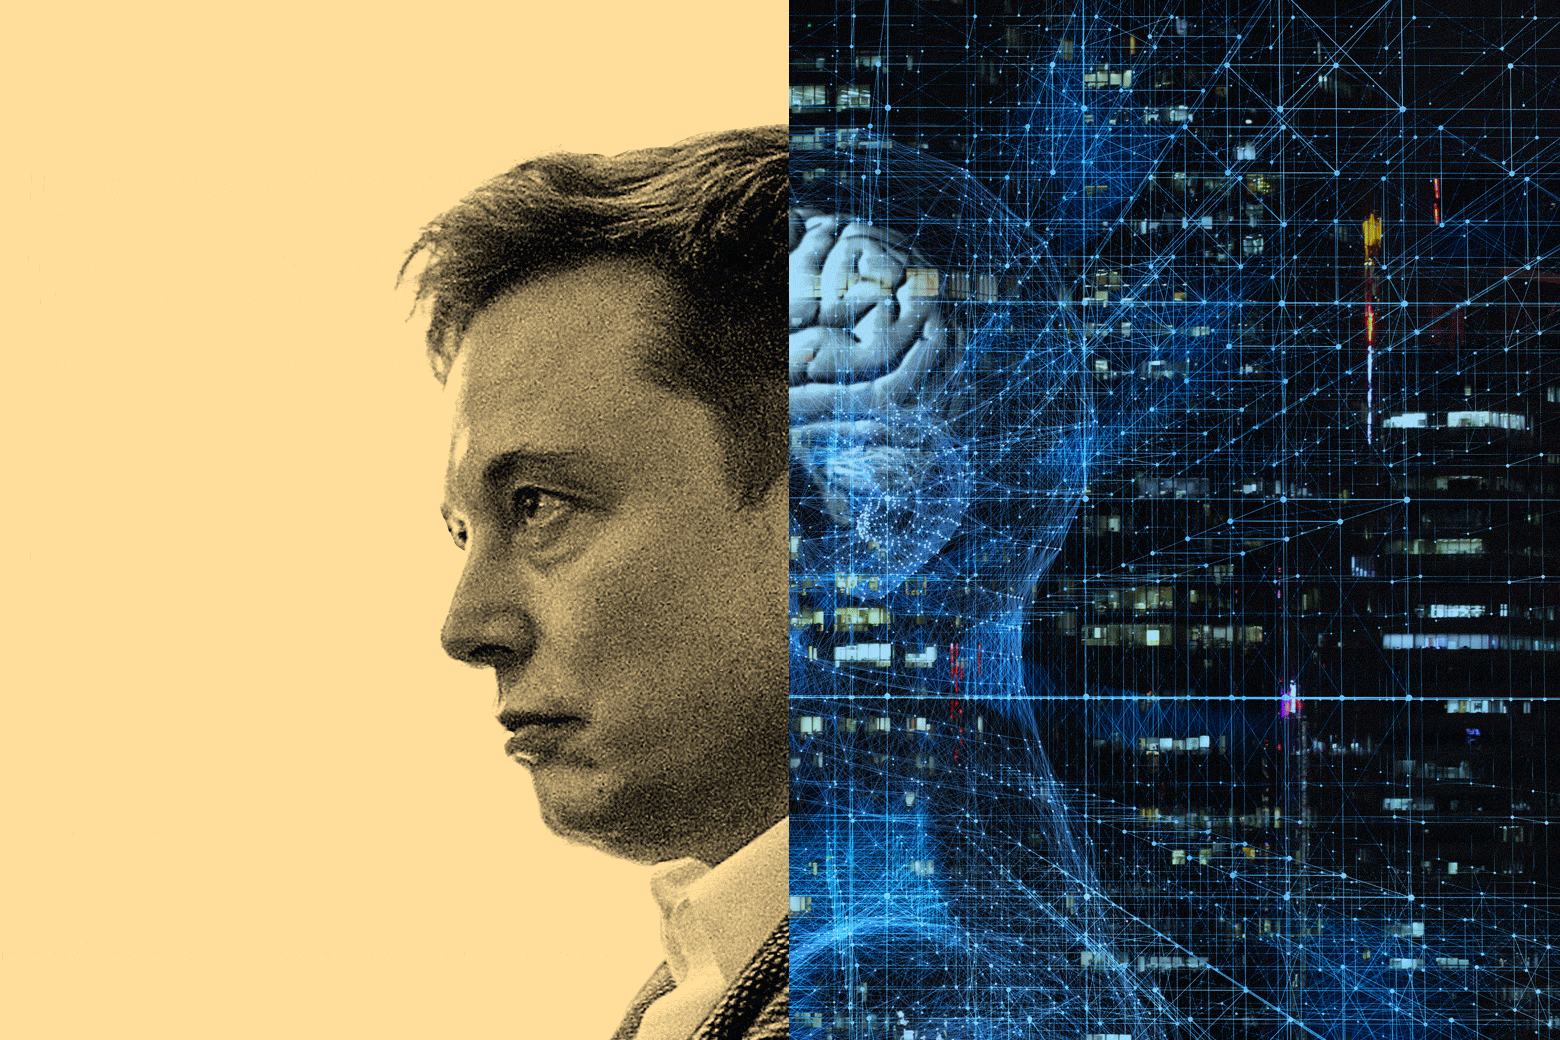 Photo illustration of a side by side of Elon Musk and a brain with digital wire imagery.